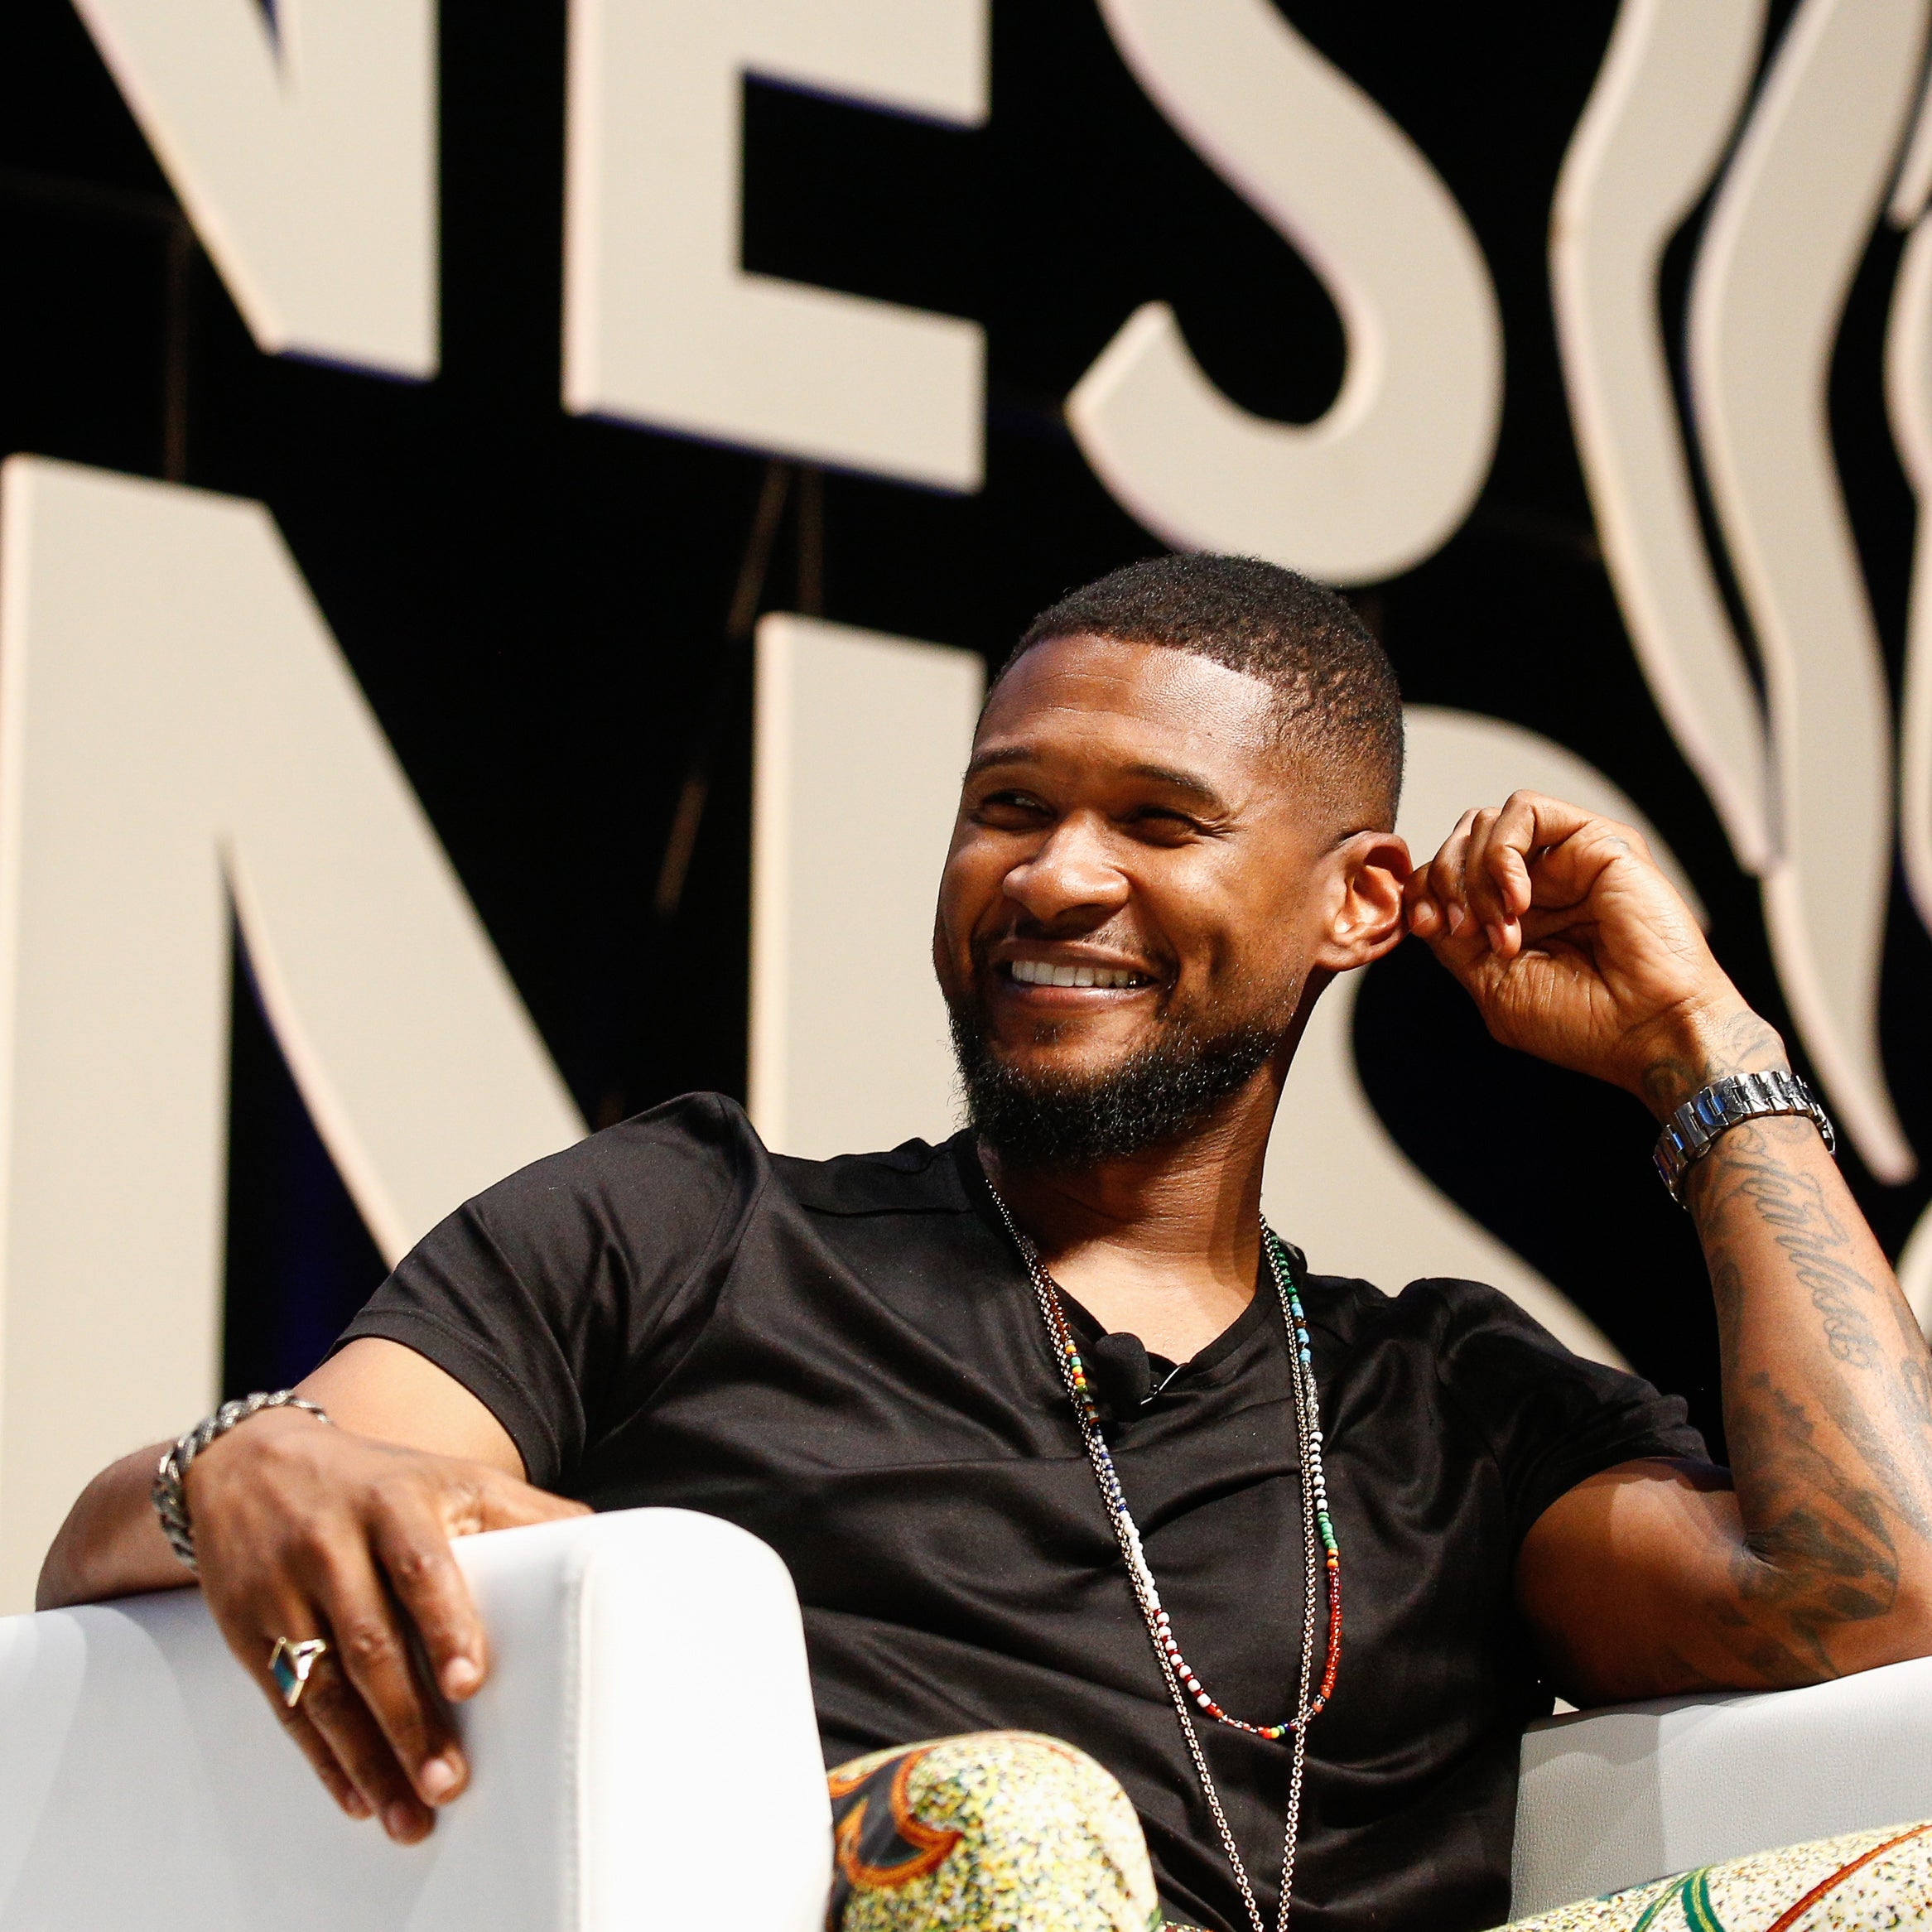 Usher is now Selling his 'Don't Trump America' Shirt From the BET Awards
